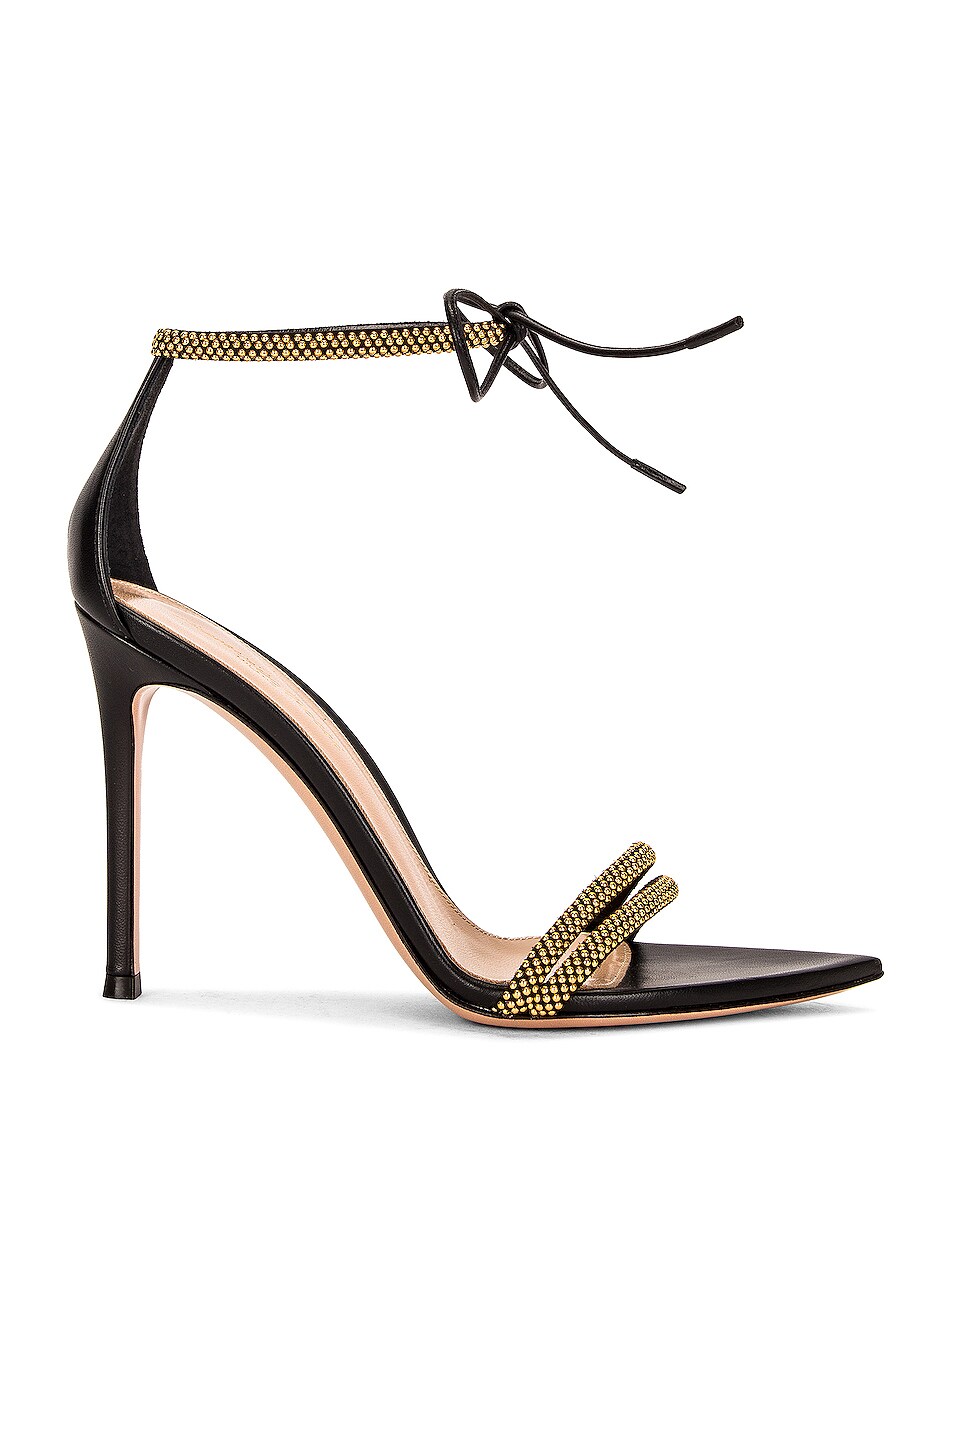 Image 1 of Gianvito Rossi Messalina Ankle Strap Sandals in Black & Black